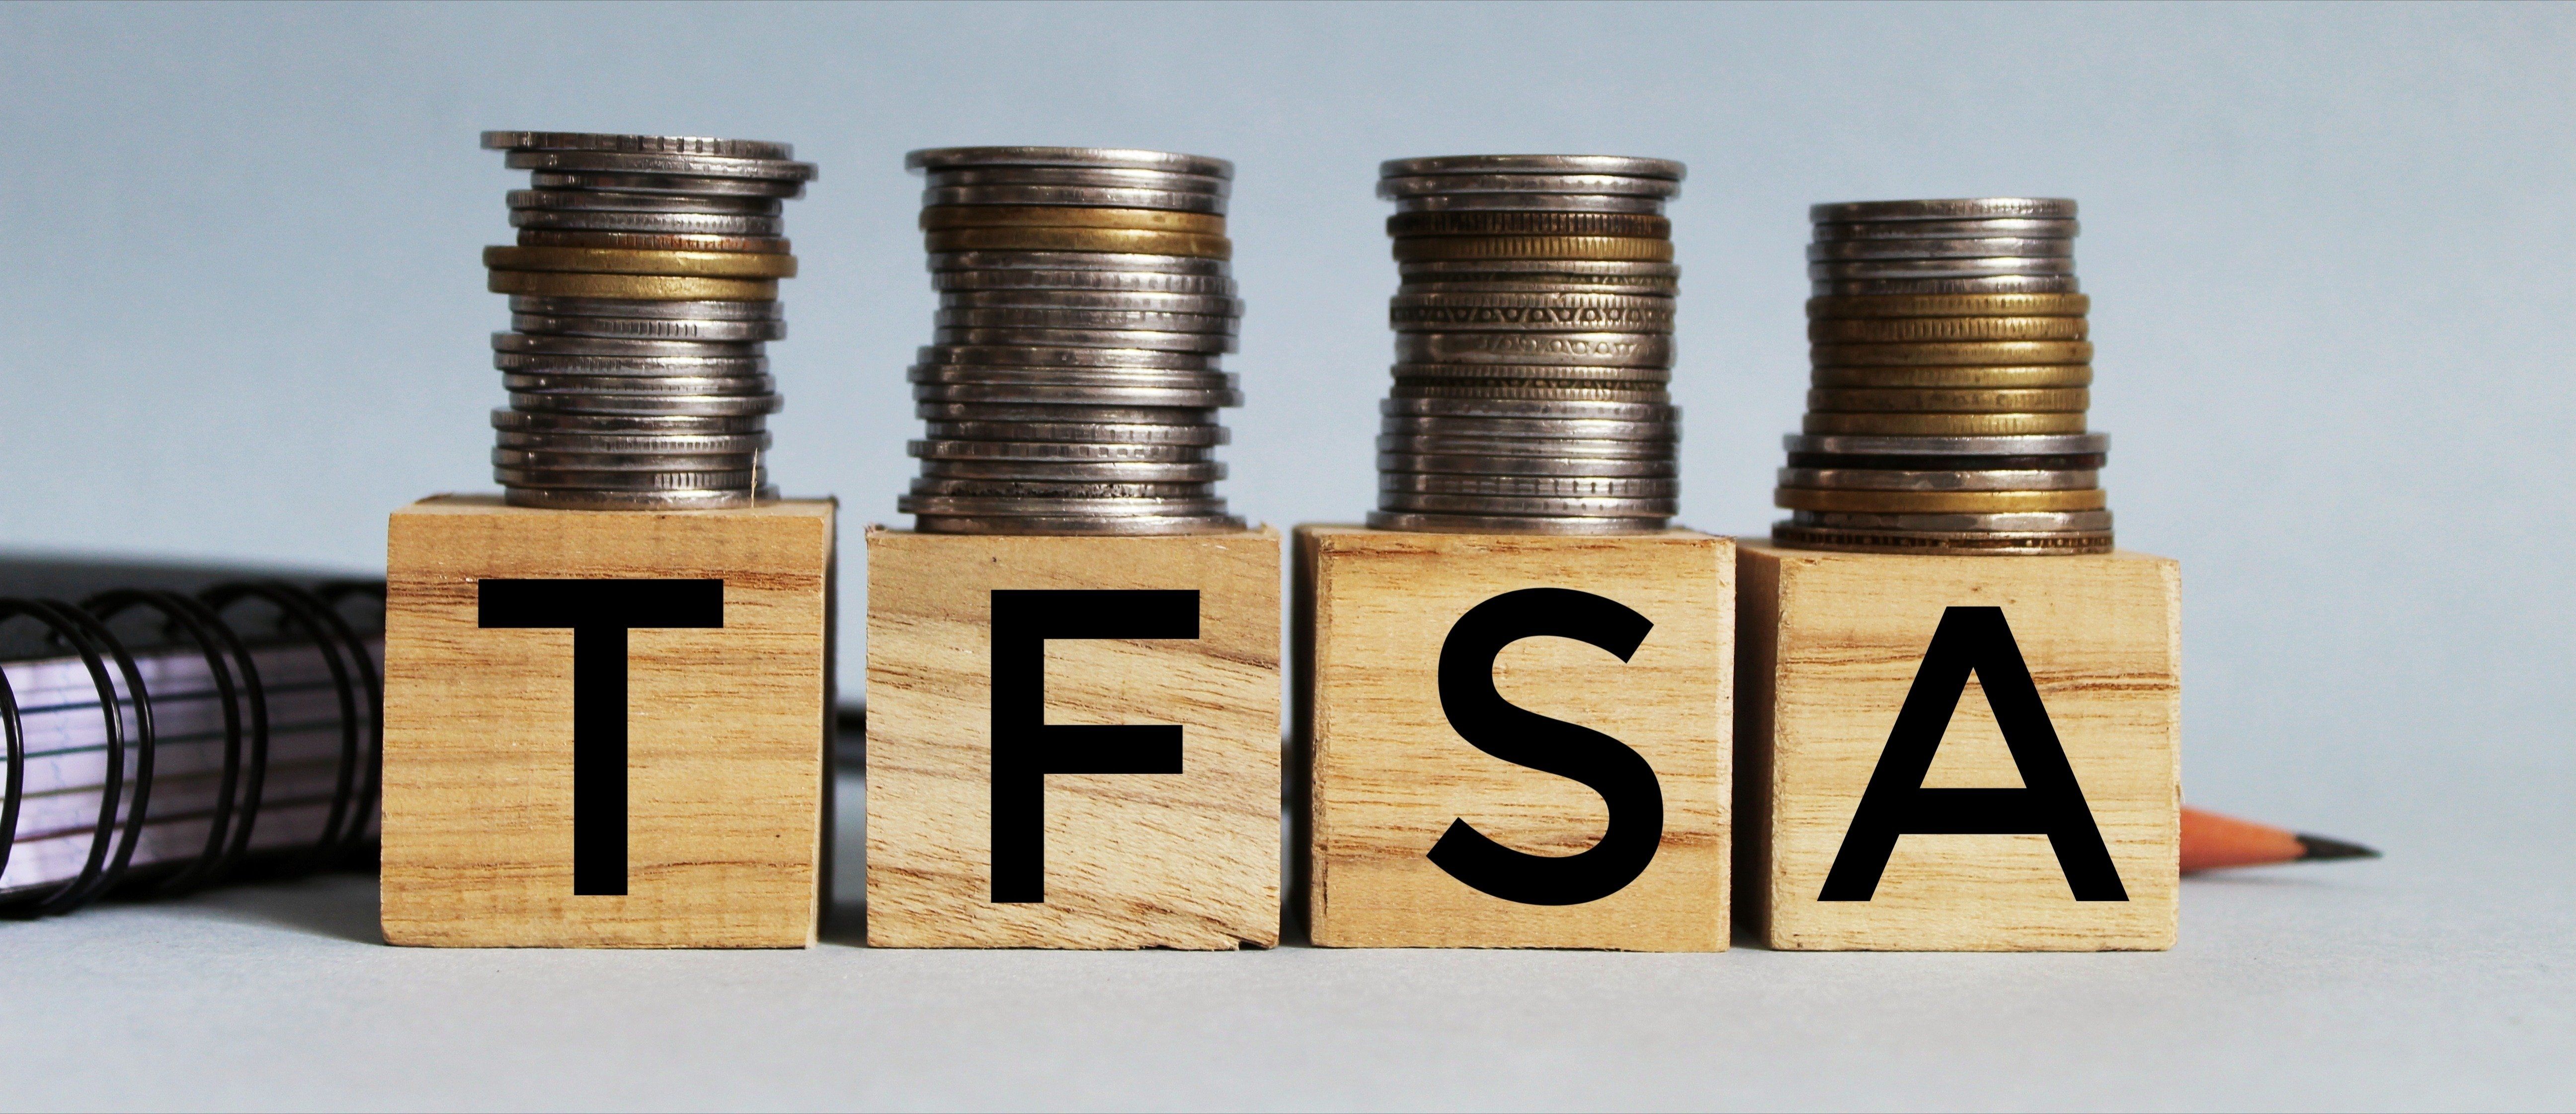 Tax Free Savings Account, TFSA letters on wooden blocks